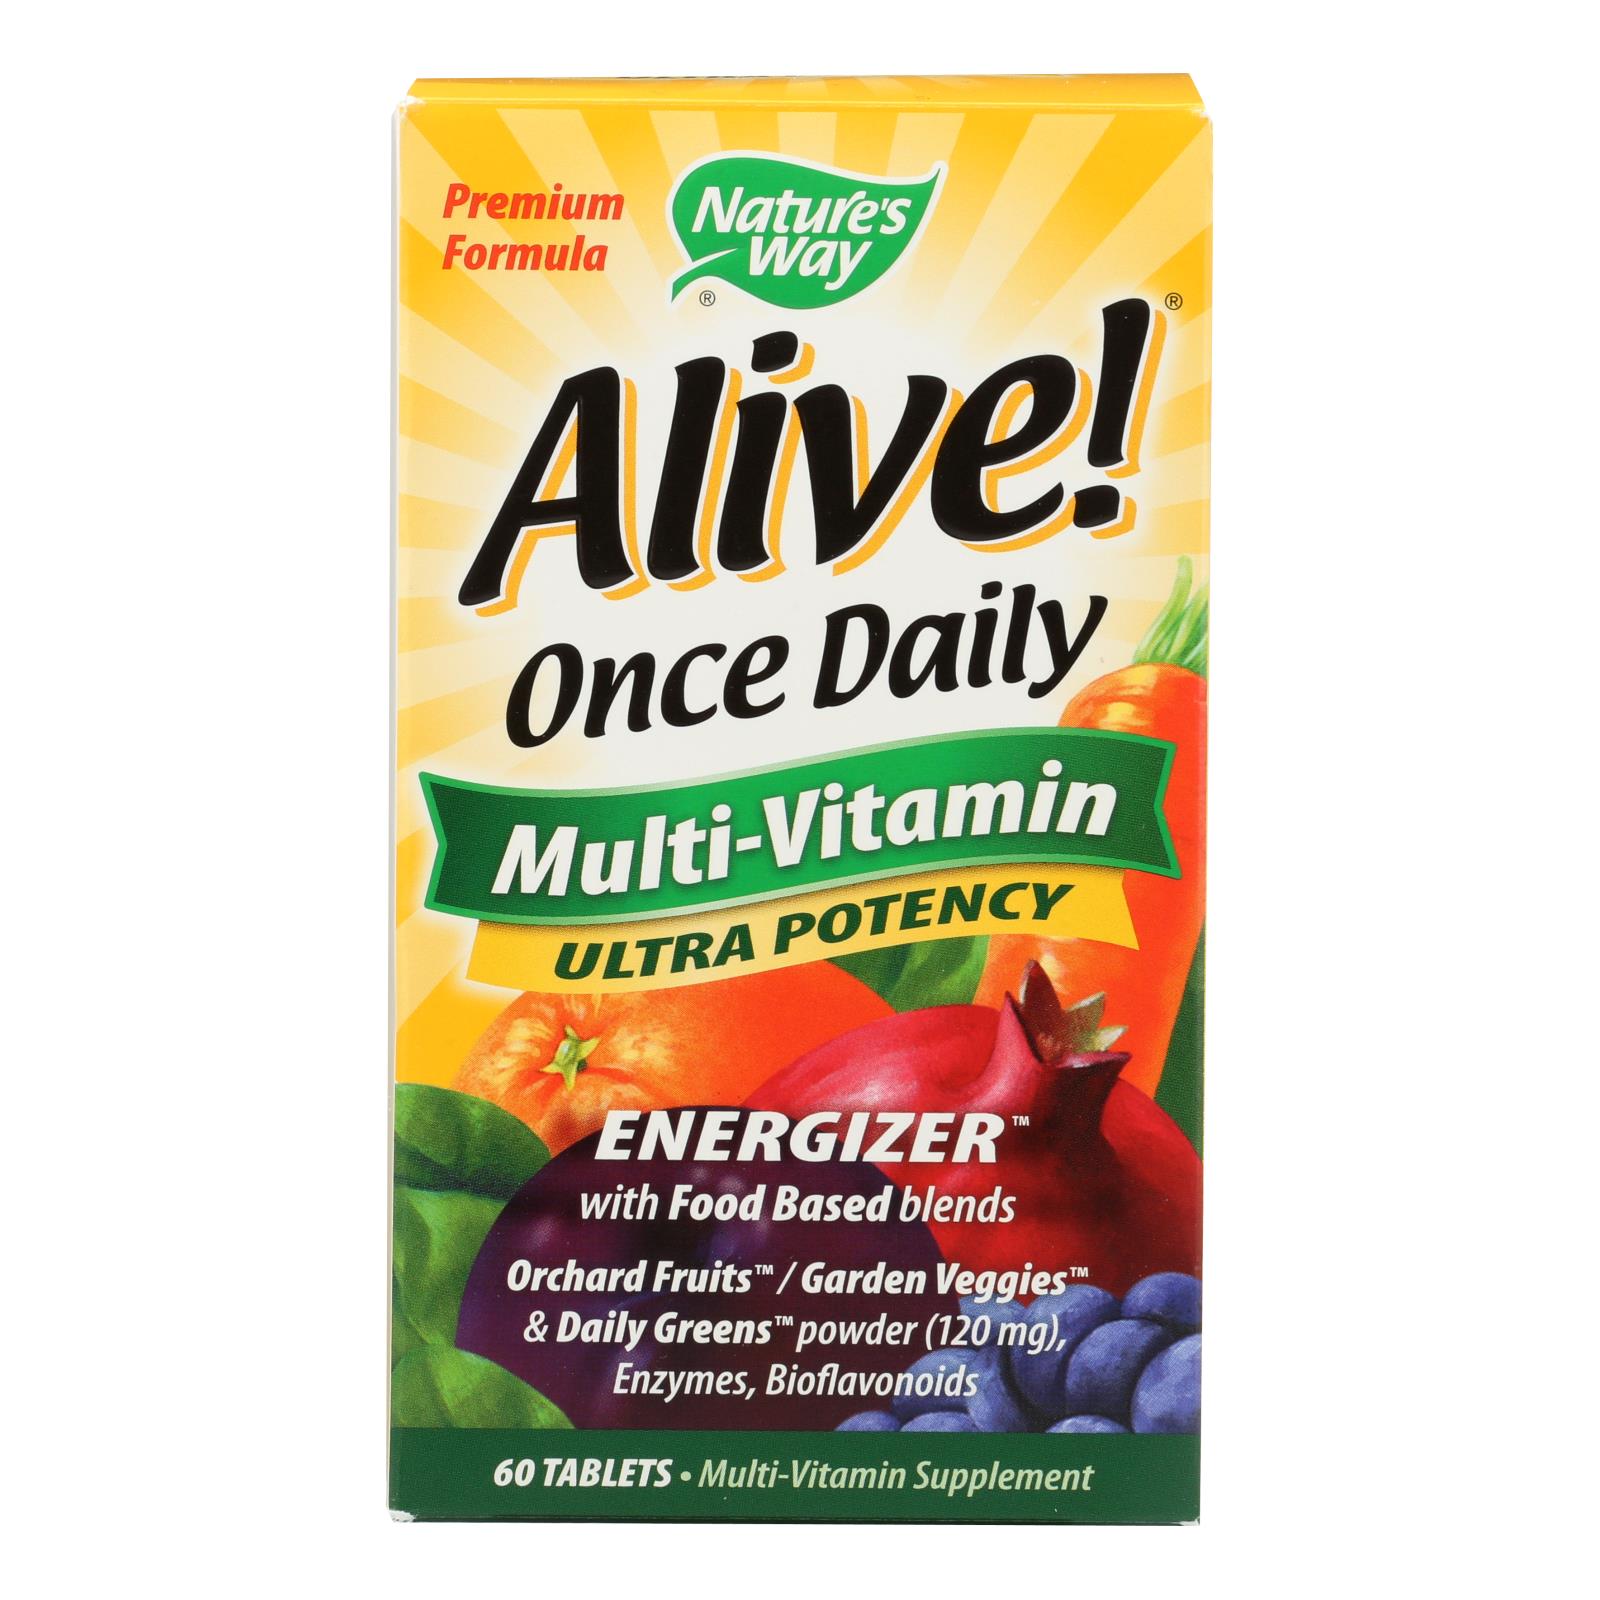 Nature's Way - Alive! Once Daily Multi-Vitamin - Ultra Potency - 60 Tablets